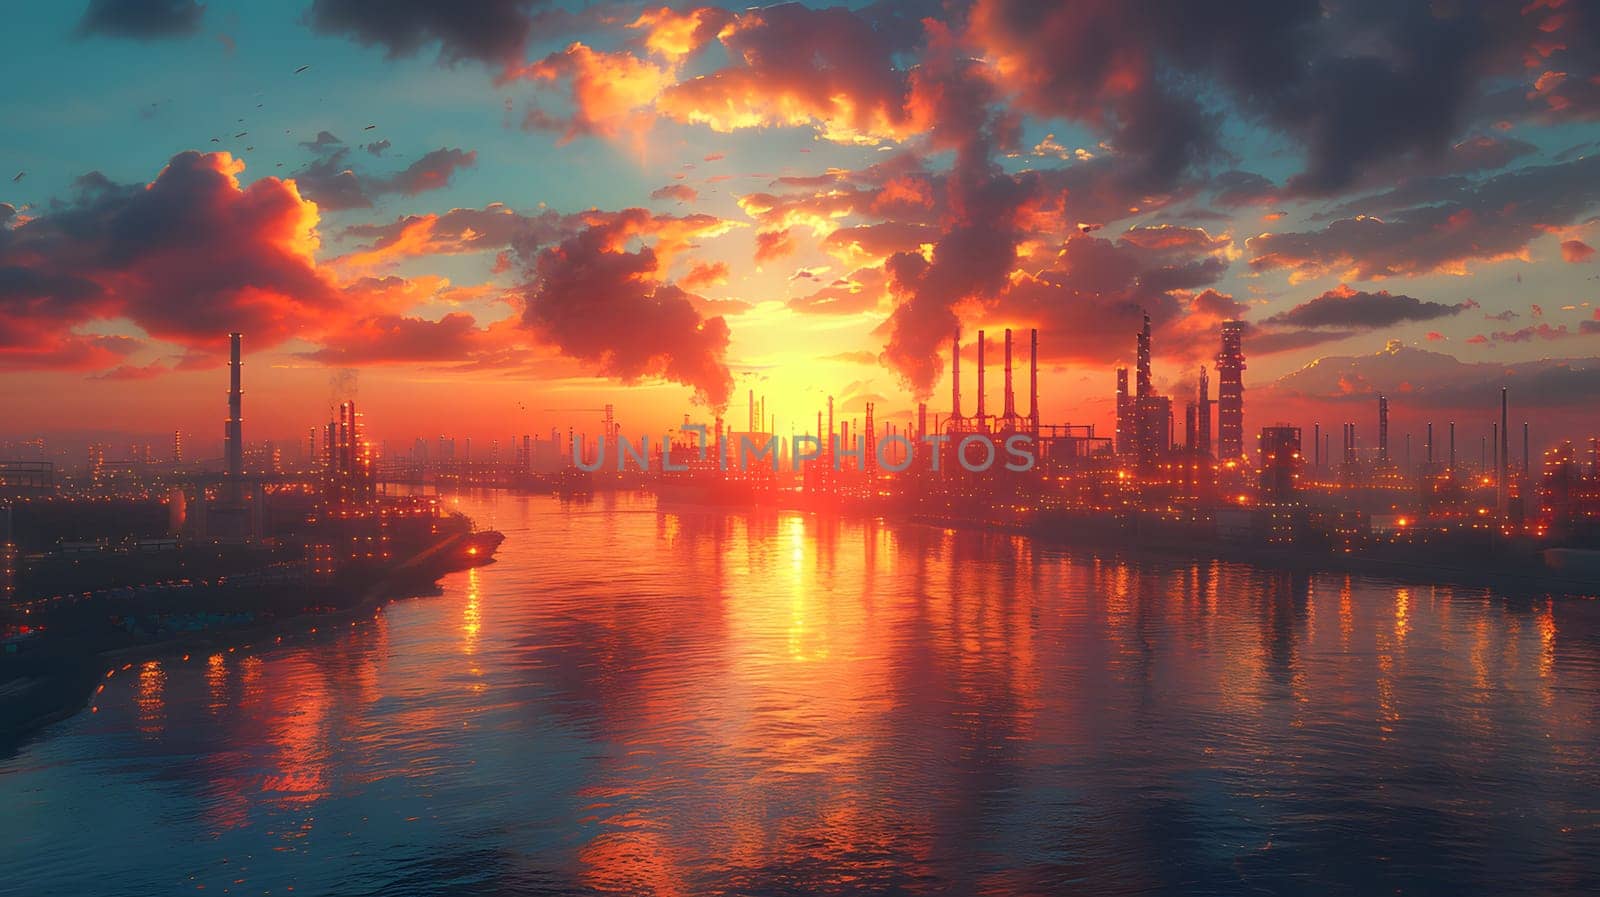 A sunset casts a warm glow over the water, with a factory silhouette in the background. The sky is painted with vibrant hues of red and orange, creating a stunning natural landscape